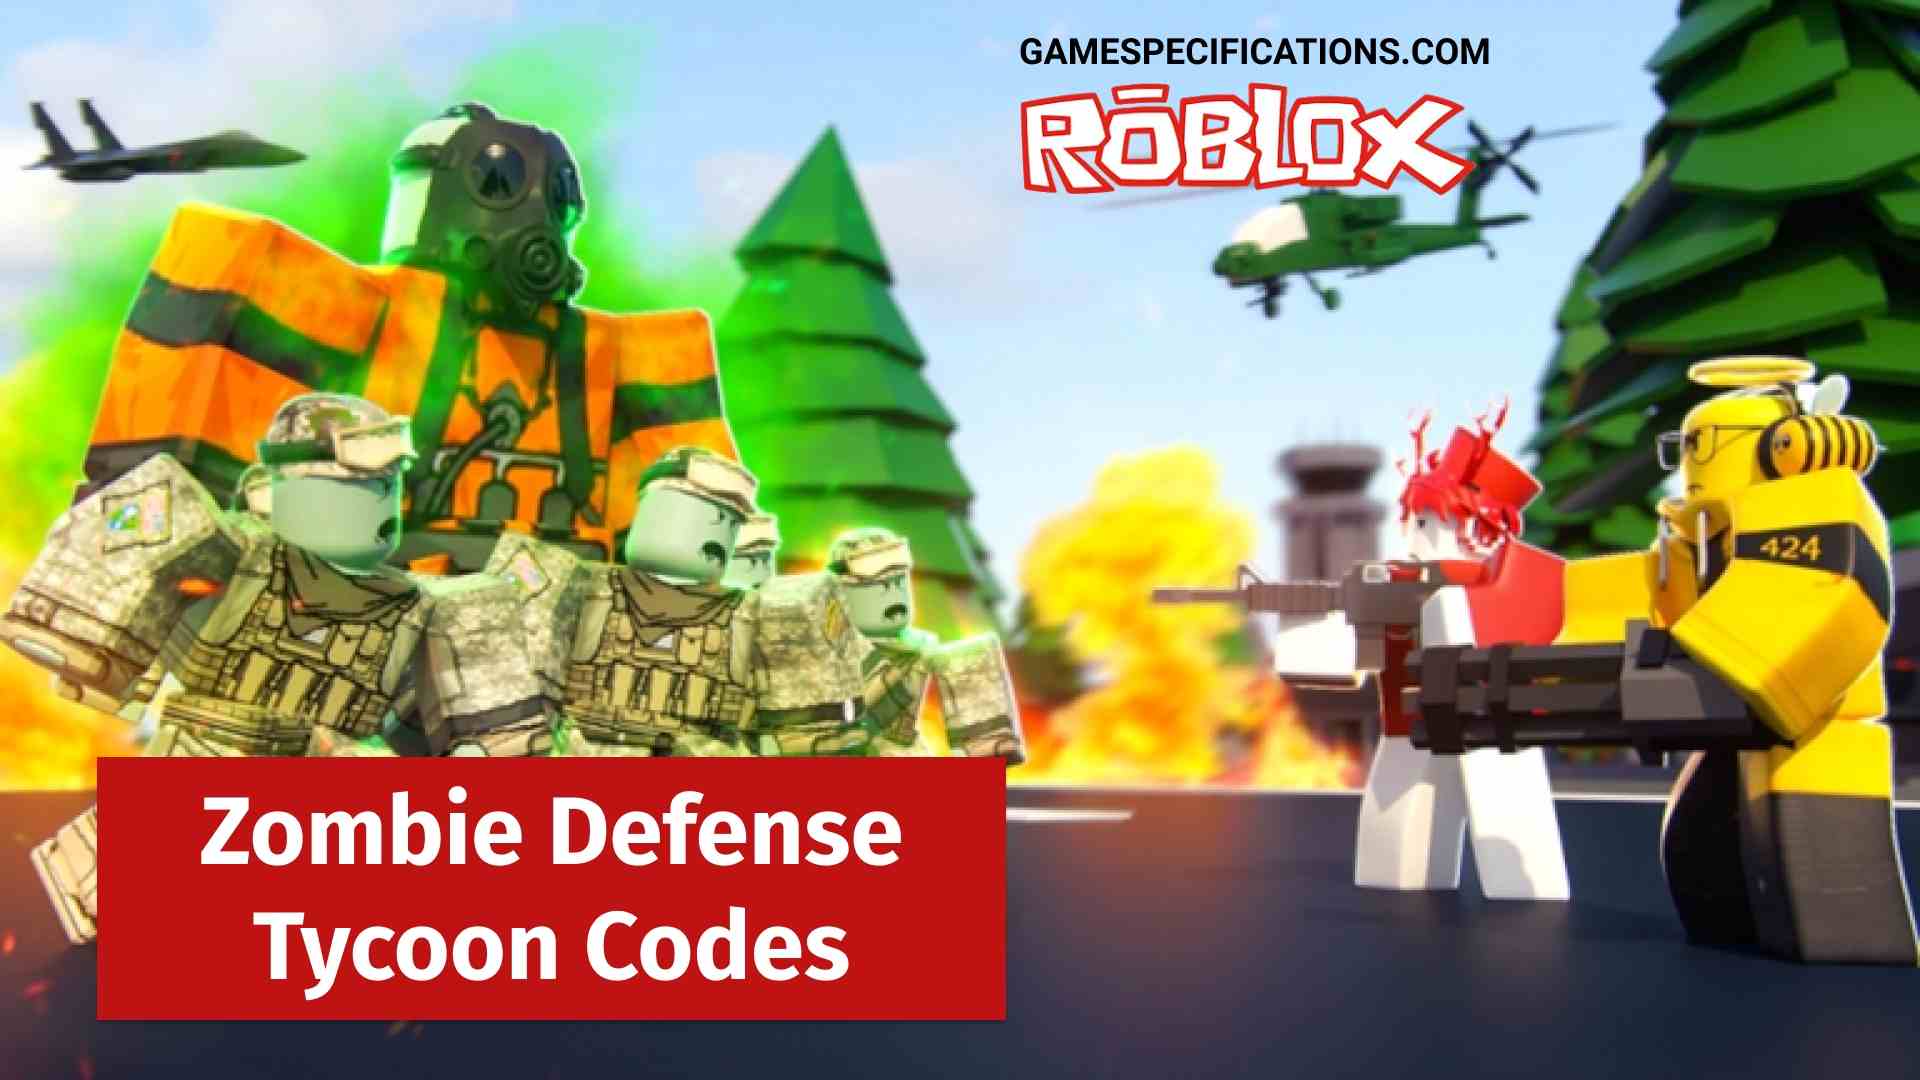 Roblox Zombie Defense Tycoon Codes July 2021 Game Specifications - videos de roblox zombie